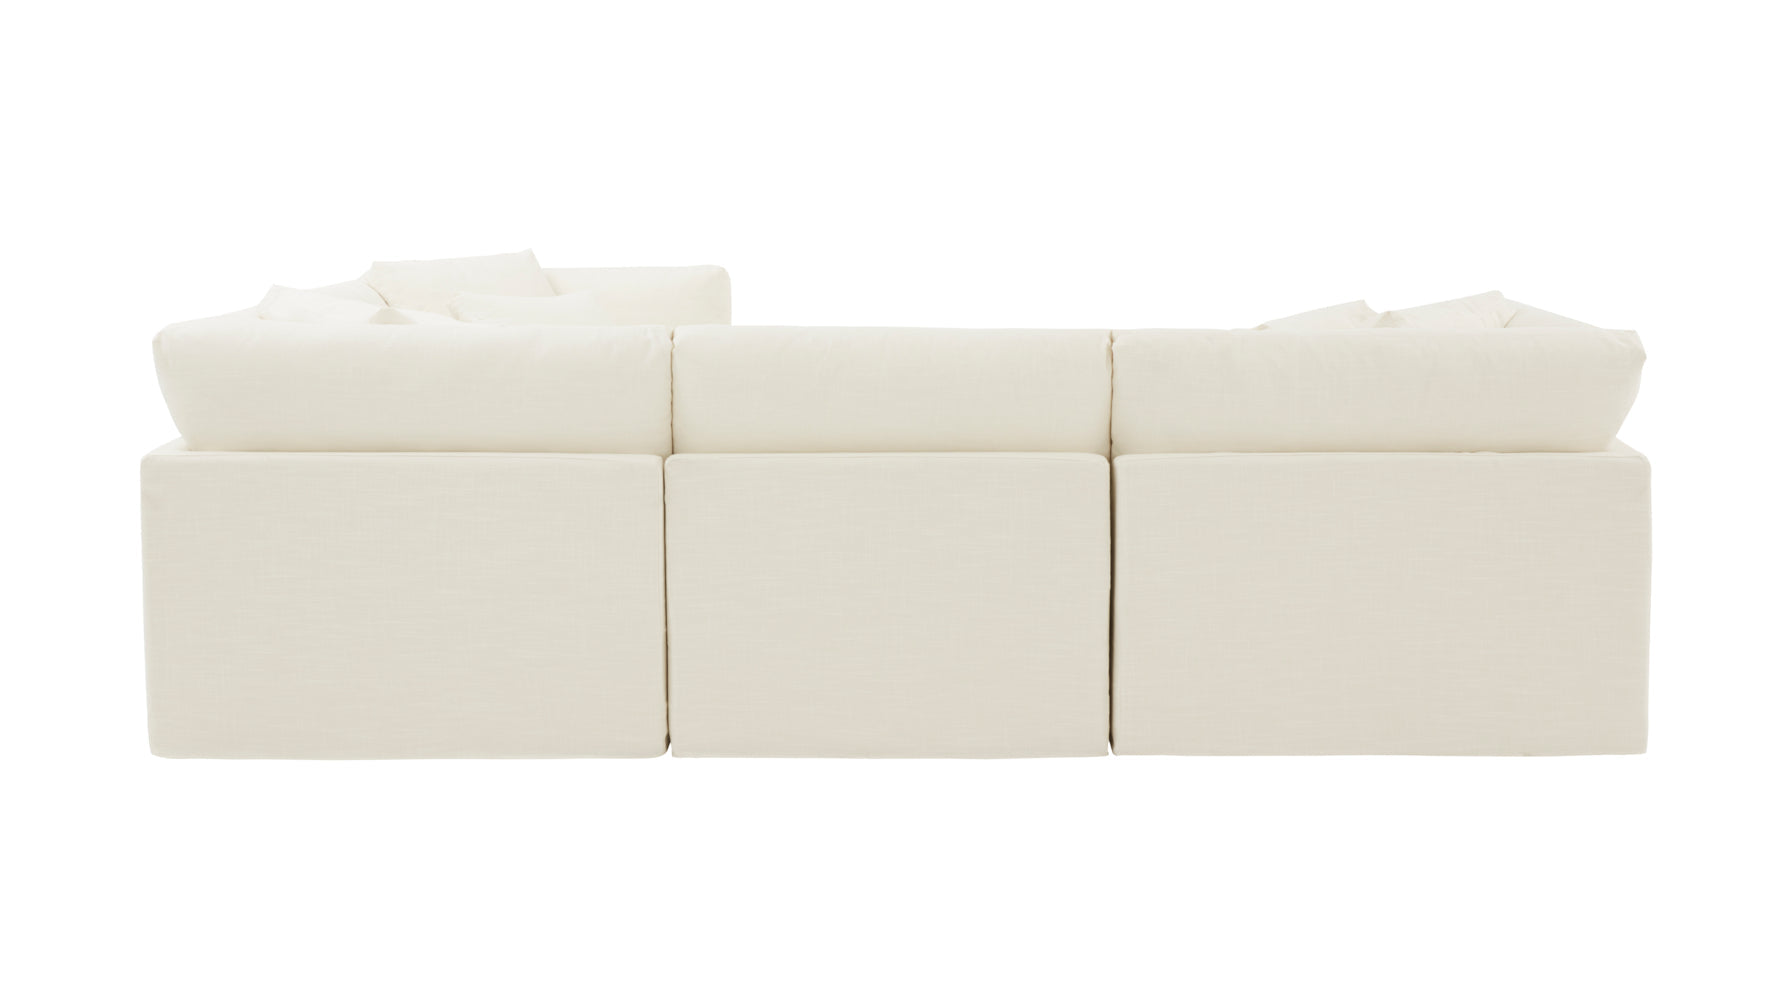 Get Together™ 4-Piece Modular Sectional Closed, Large, Cream Linen - Image 6